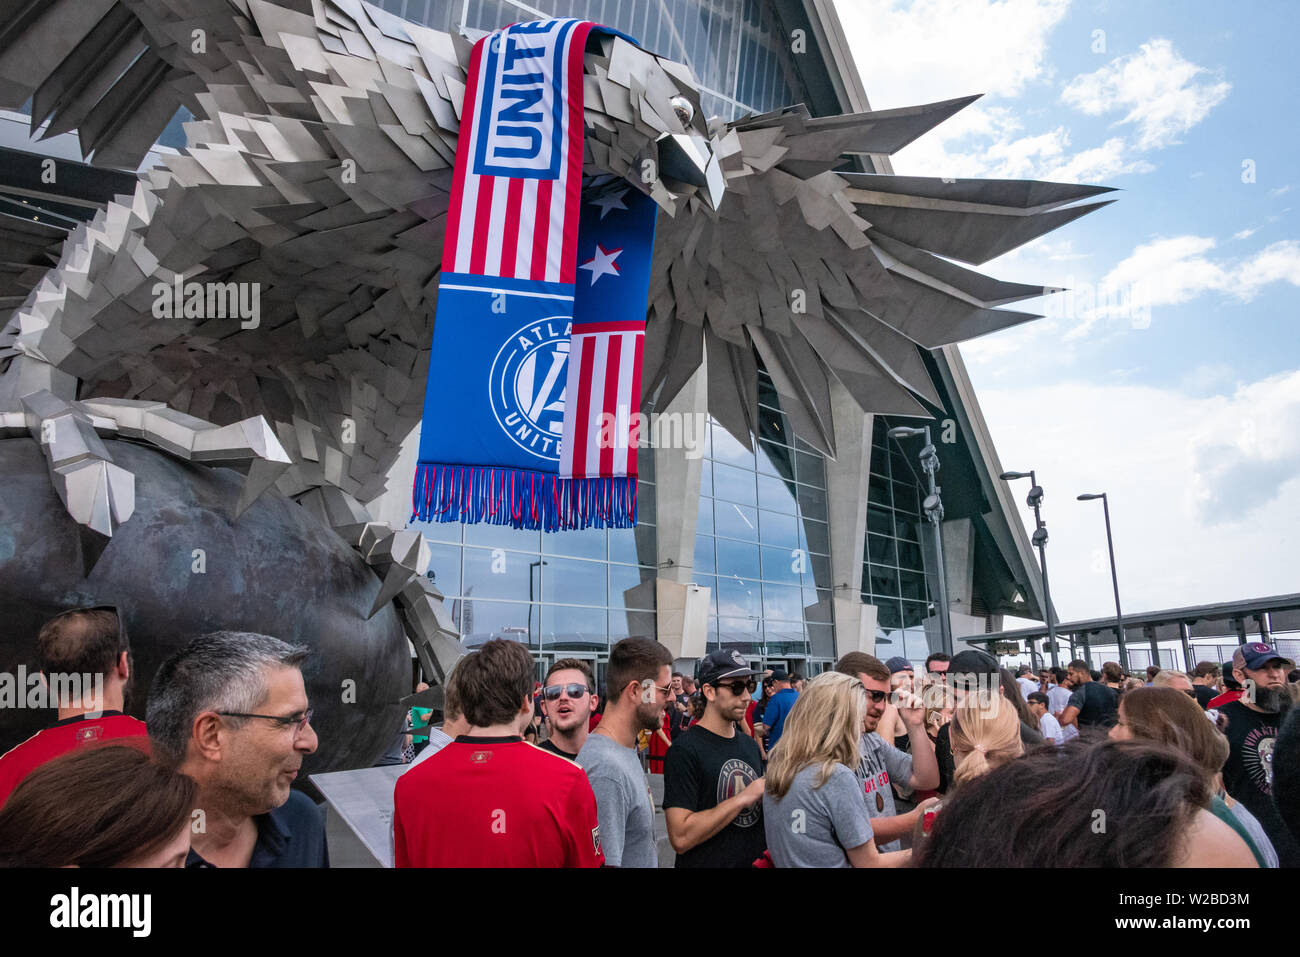 MLS soccer fans outside the entrance of Mercedes-Benz Stadium in Atlanta, Georgia, where Atlanta United FC was playing the New York Red Bulls. (USA) Stock Photo